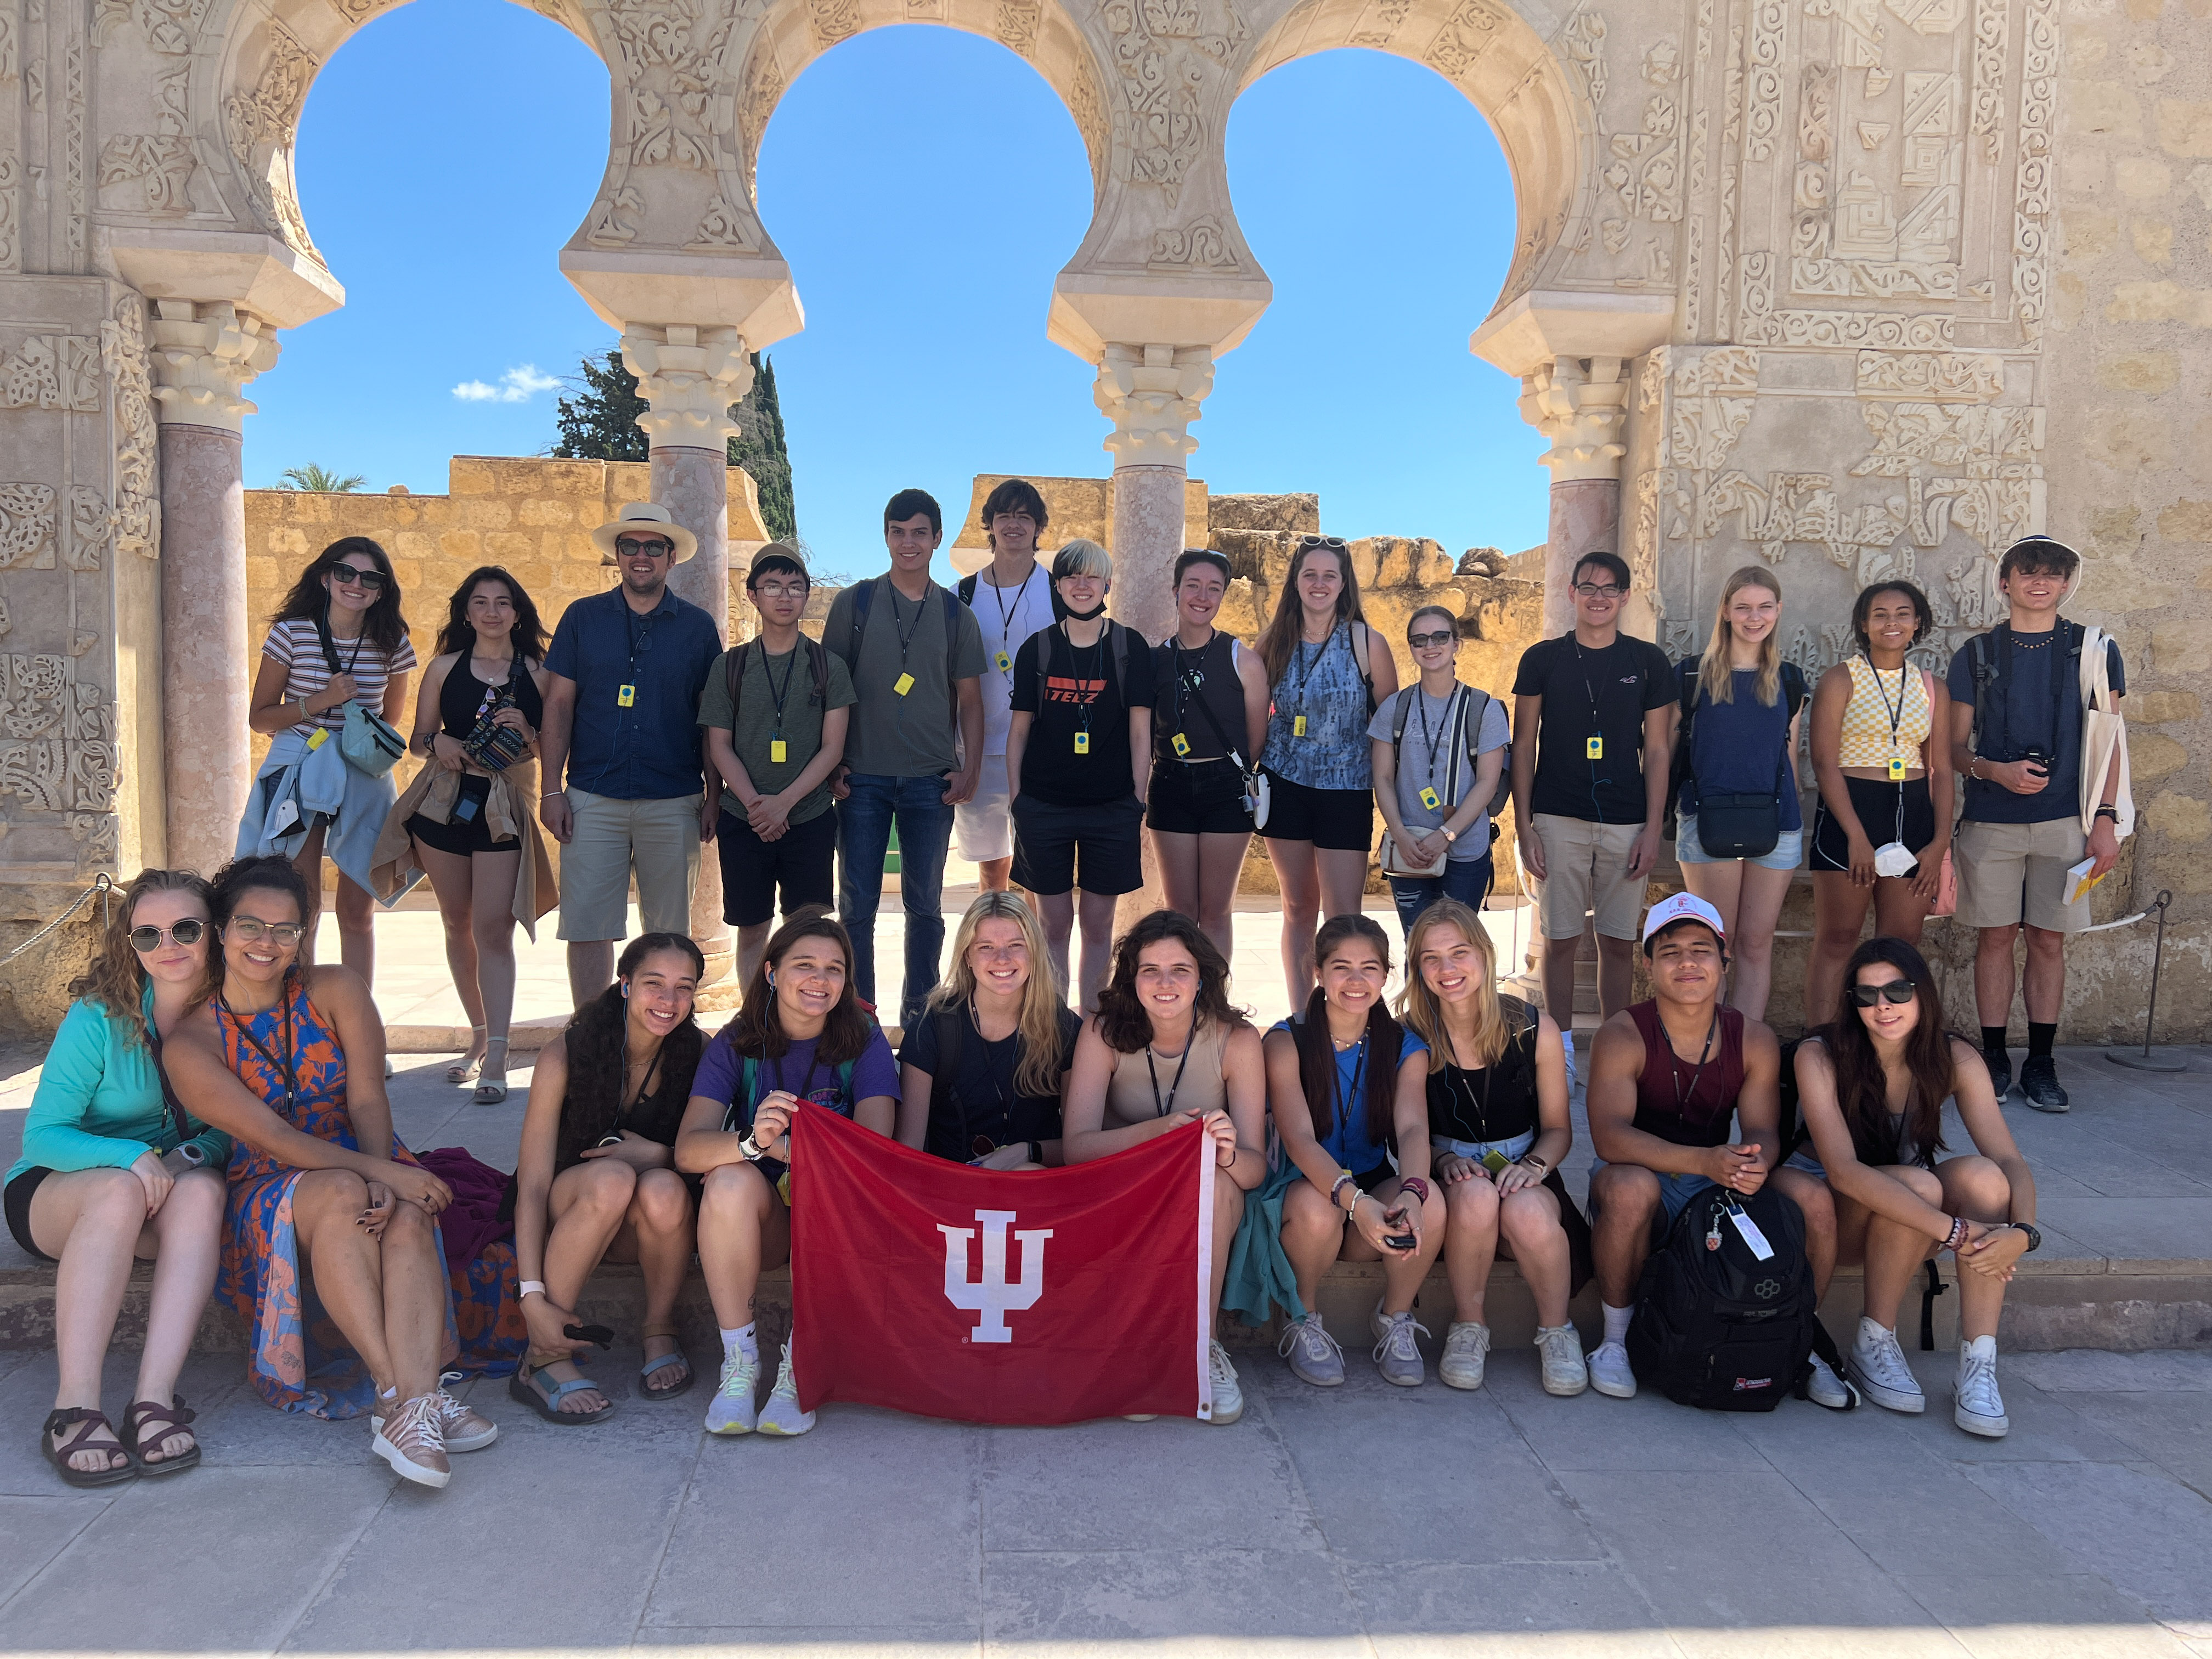 Group poses with IU flag in Cordoba